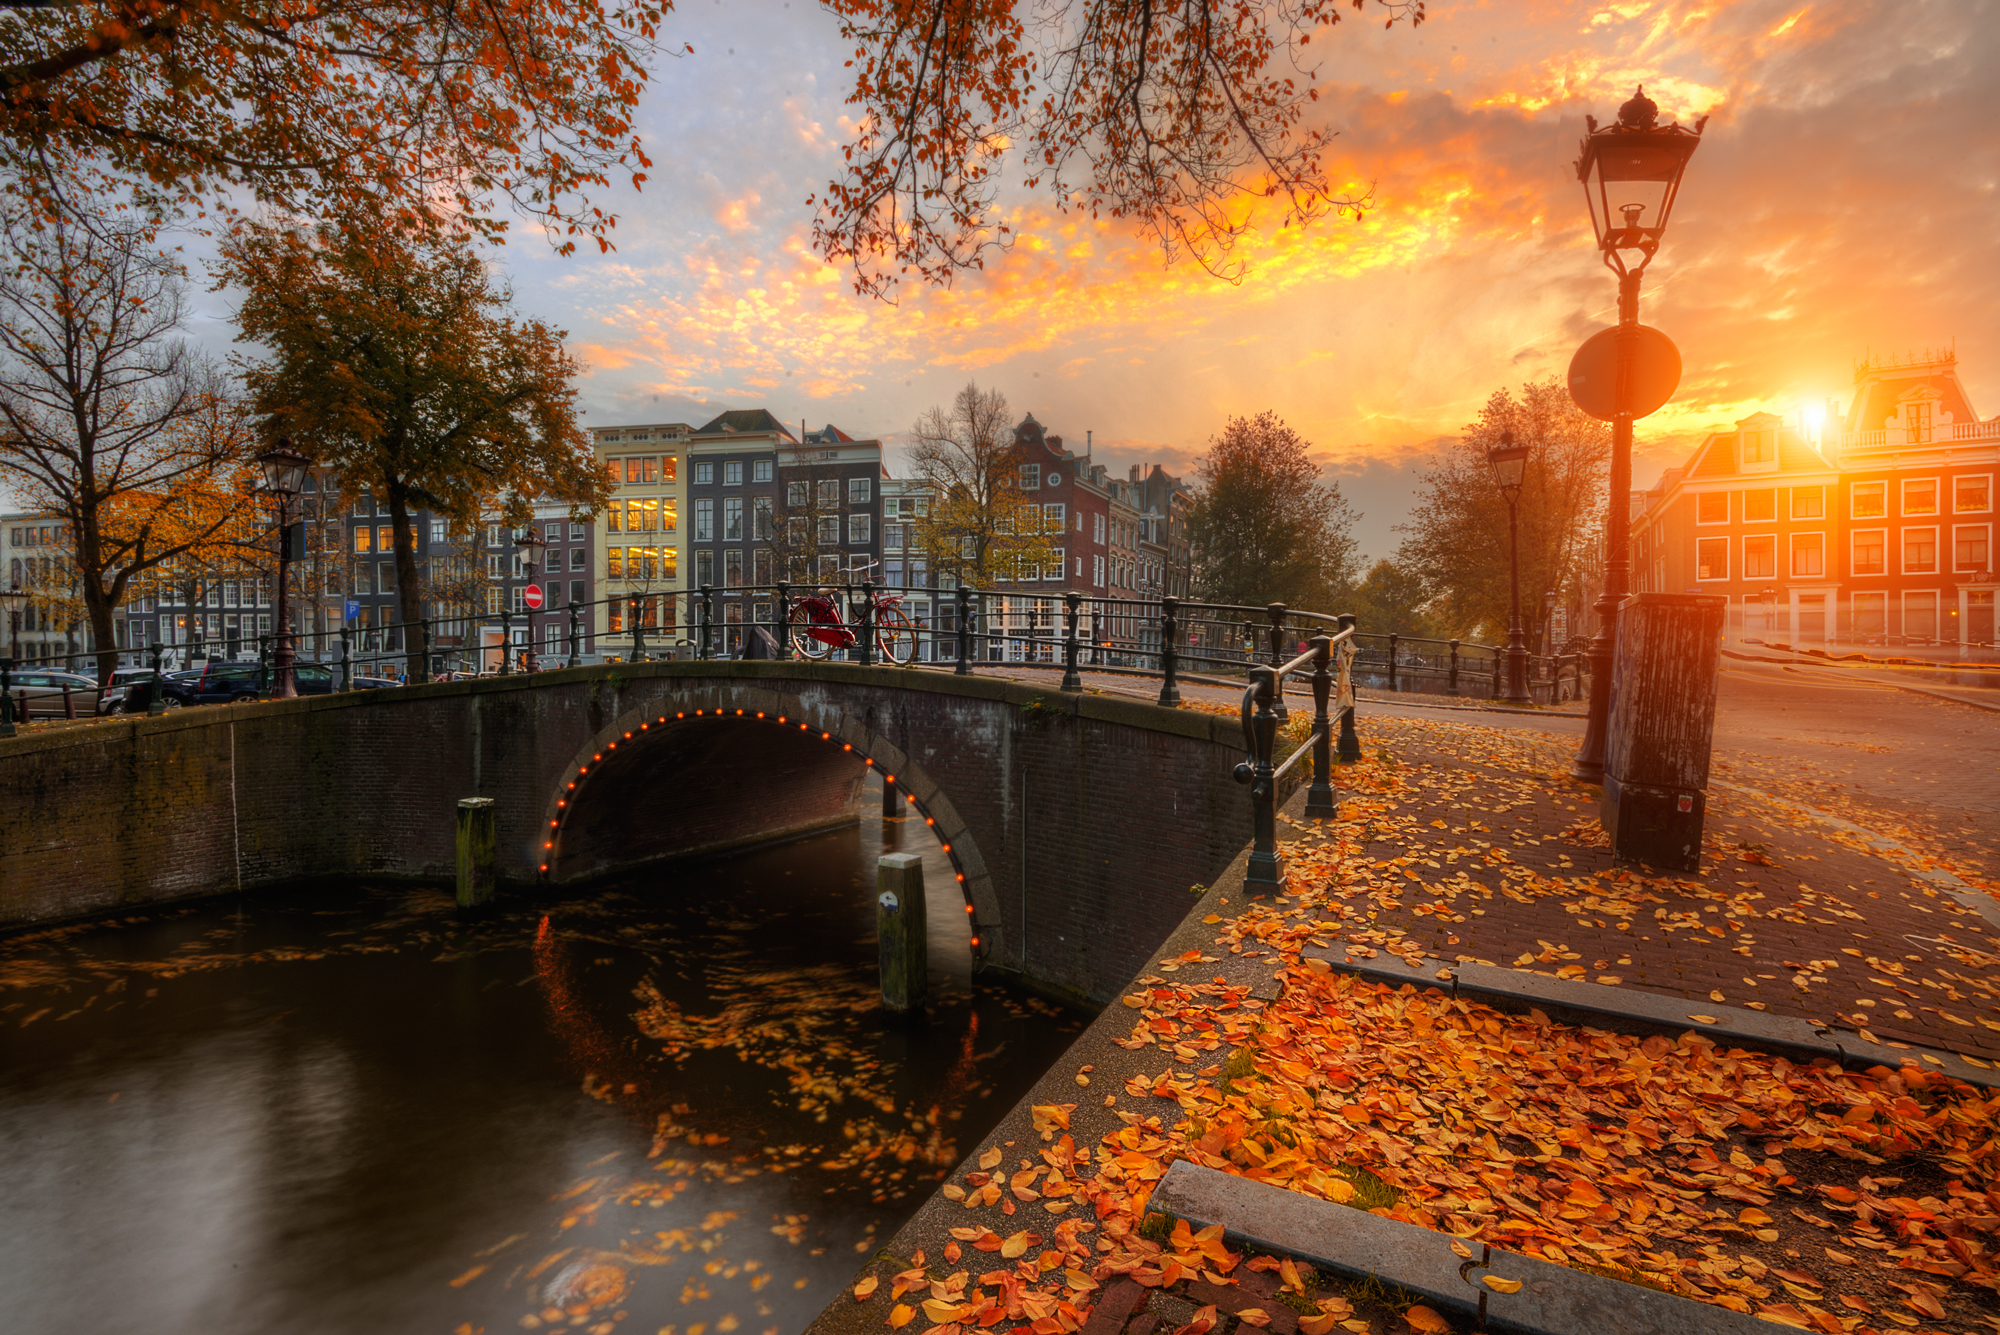 General 2000x1335 sunset water landscape outdoors photography bridge sky clouds Sun bicycle trees fall Amsterdam Netherlands